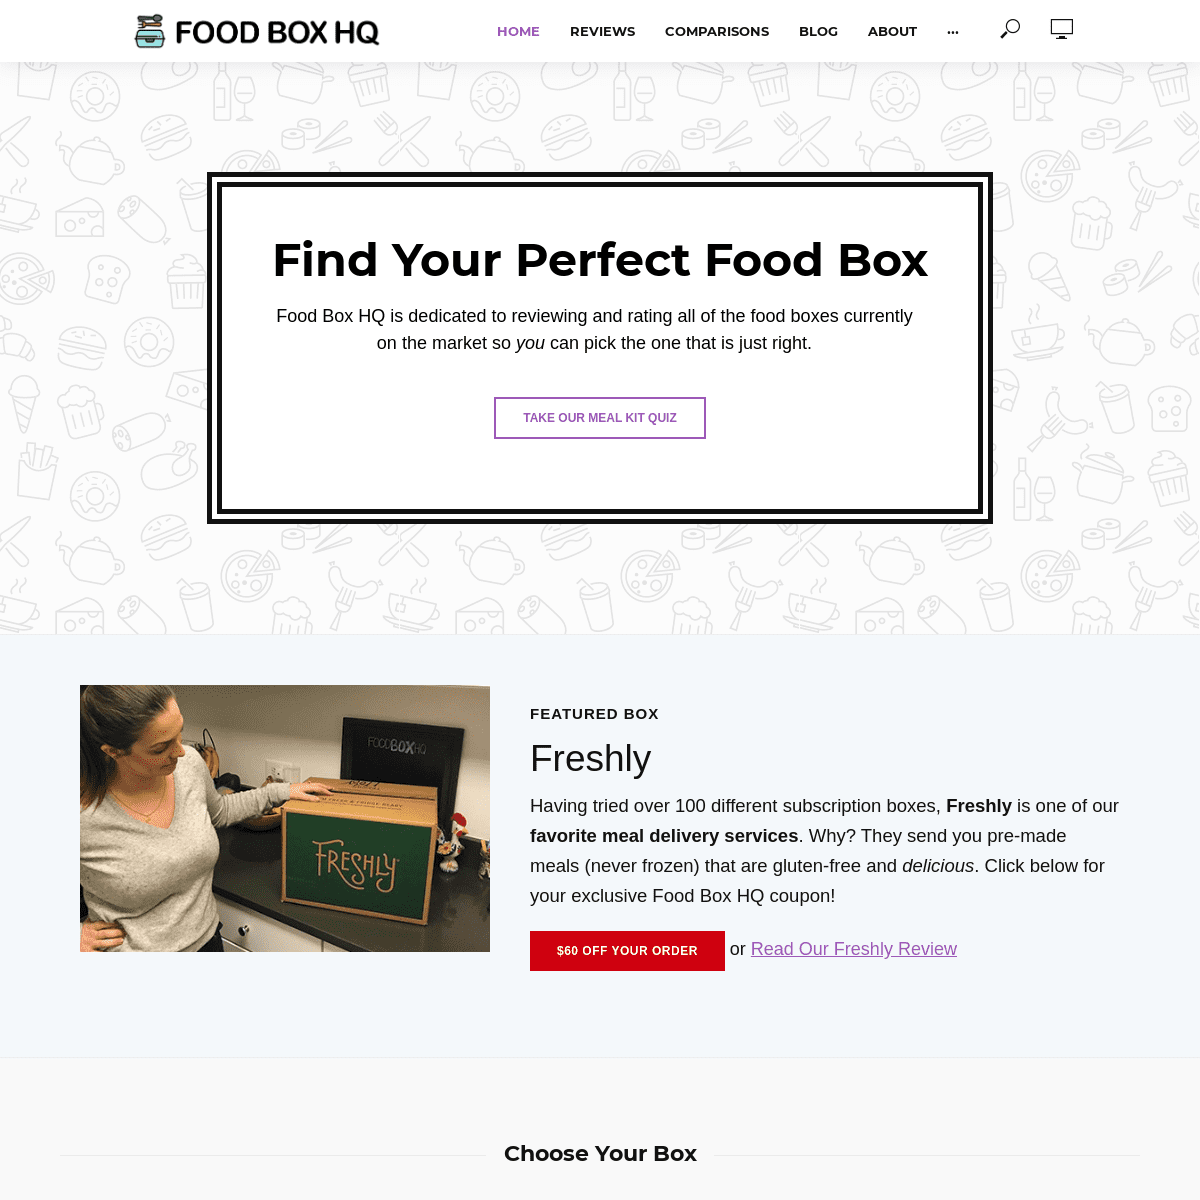 A complete backup of foodboxhq.com